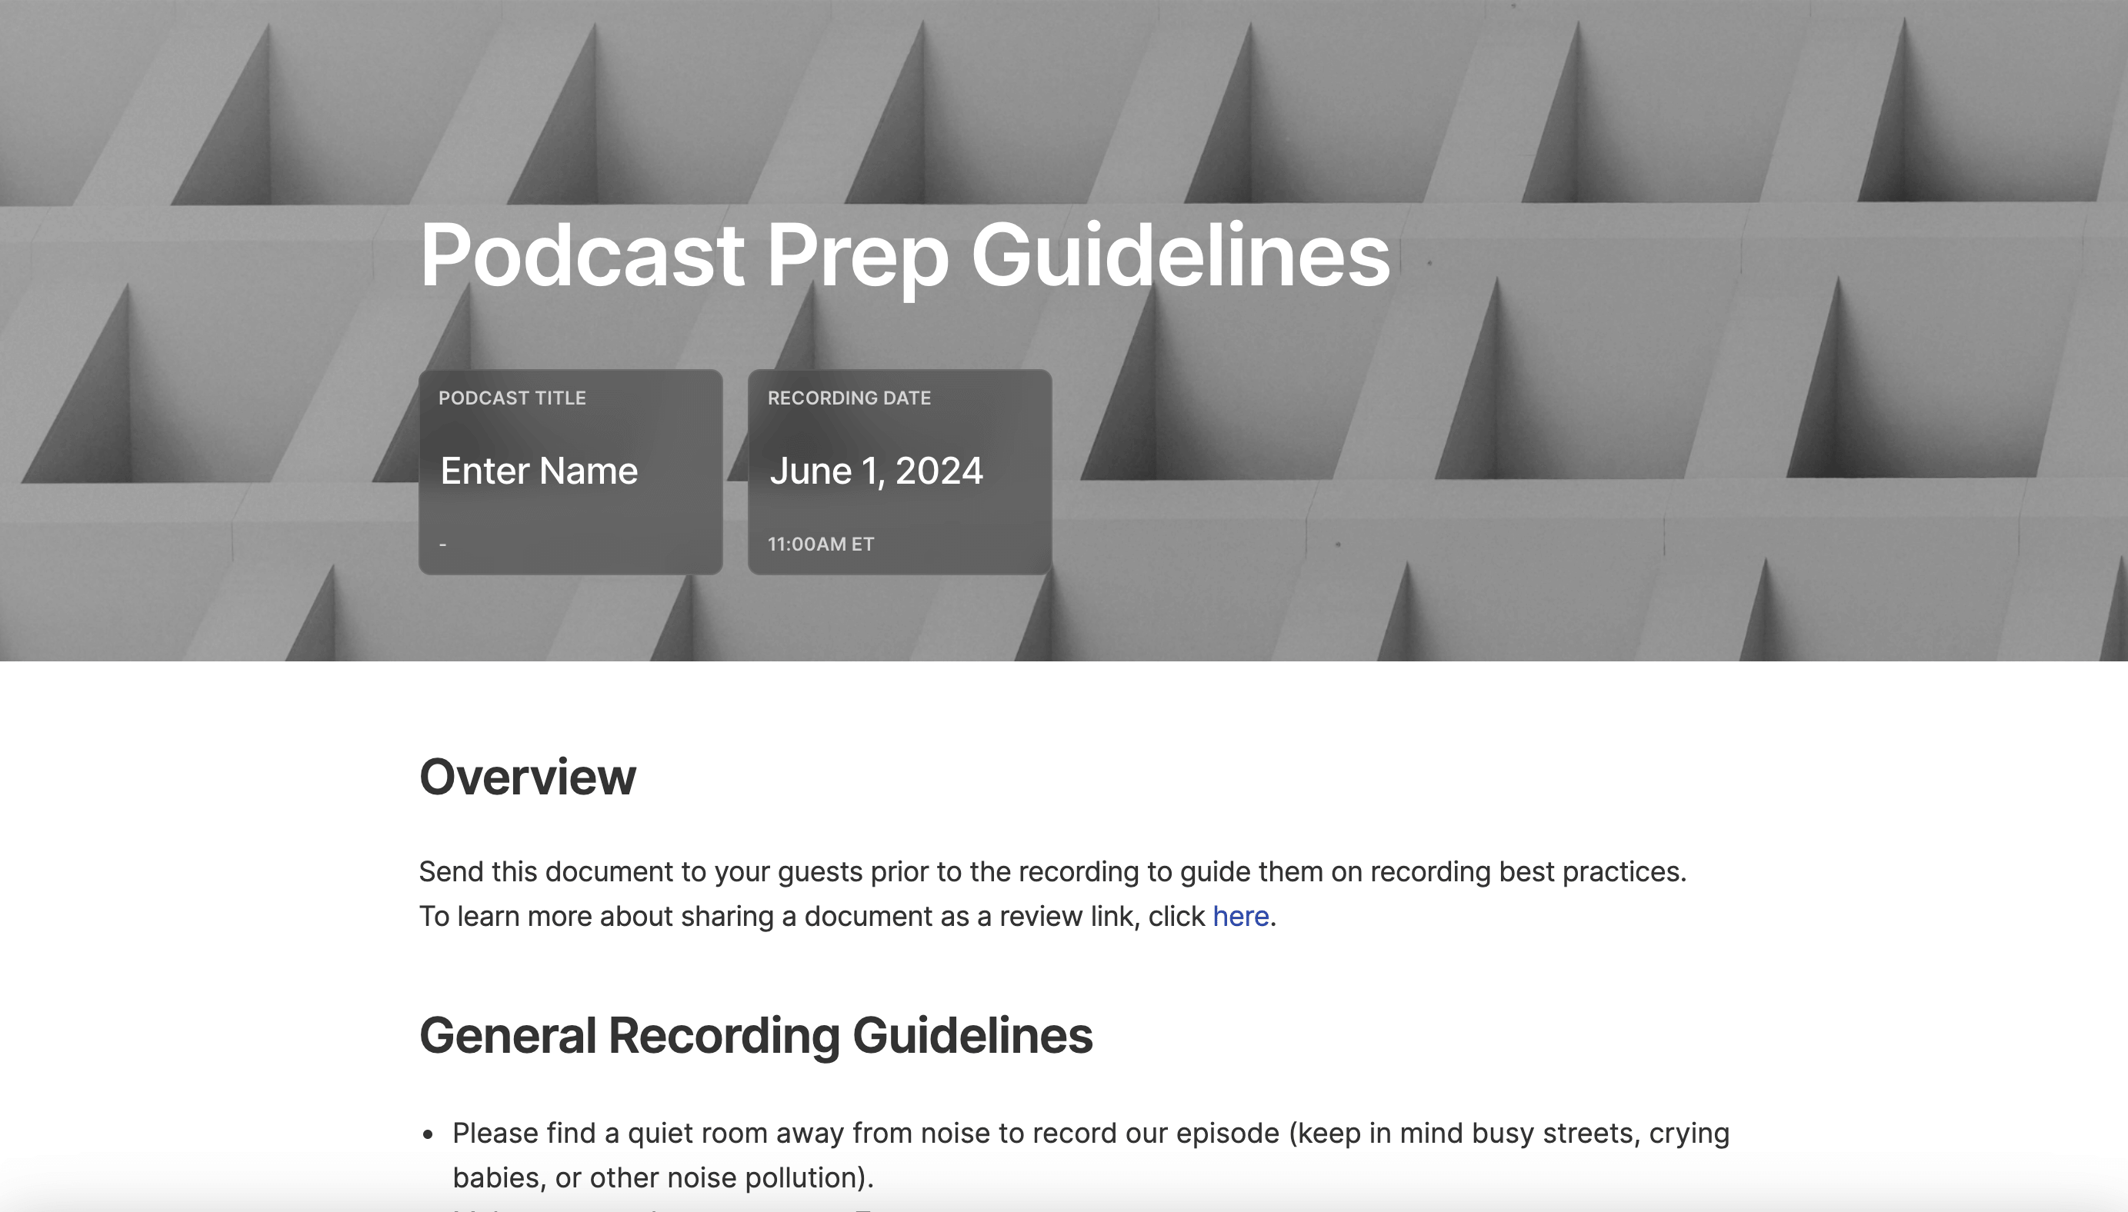 https://3389140.fs1.hubspotusercontent-na1.net/hubfs/3389140/podcast%20prep%20guidelines%20cover.png